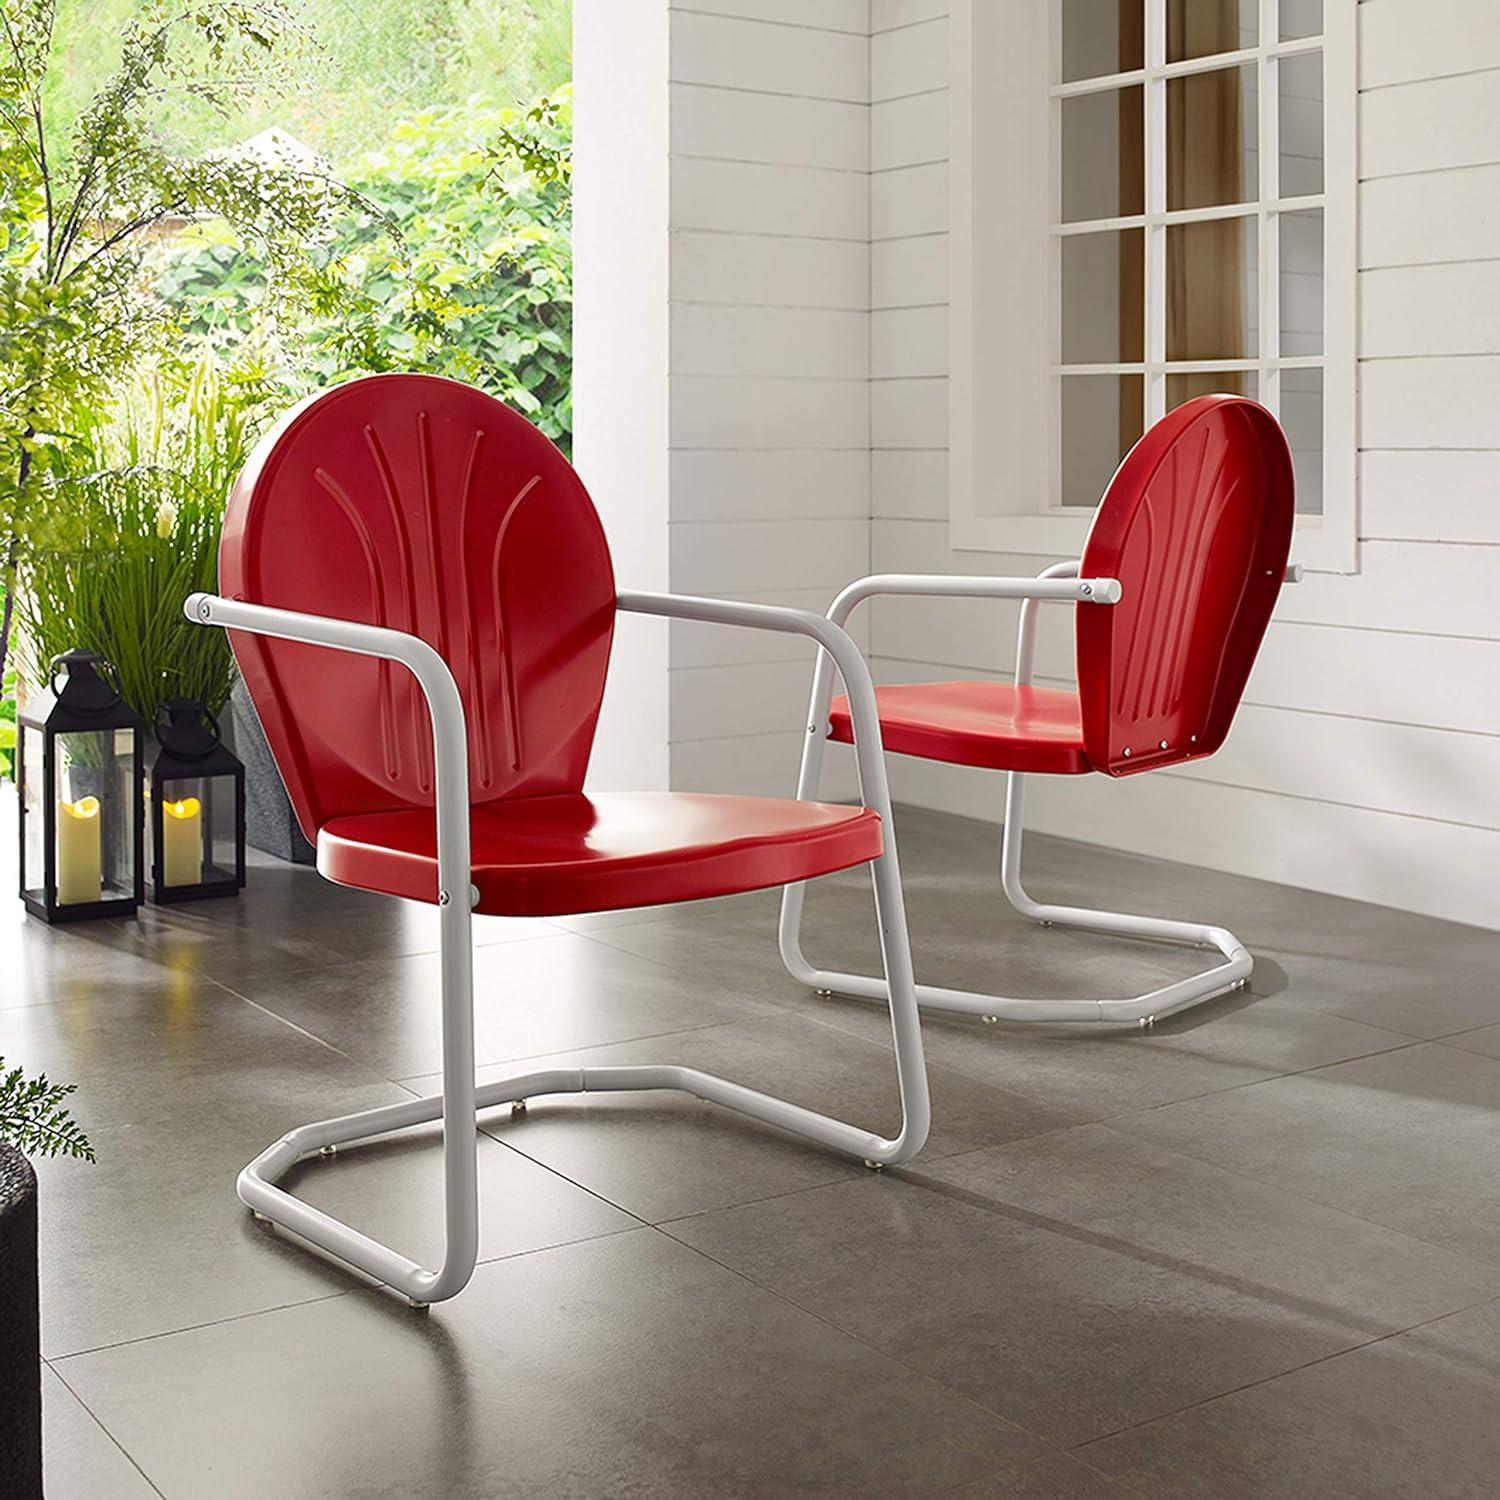 Griffith Bright Red Gloss Metal Outdoor Lounge Chair